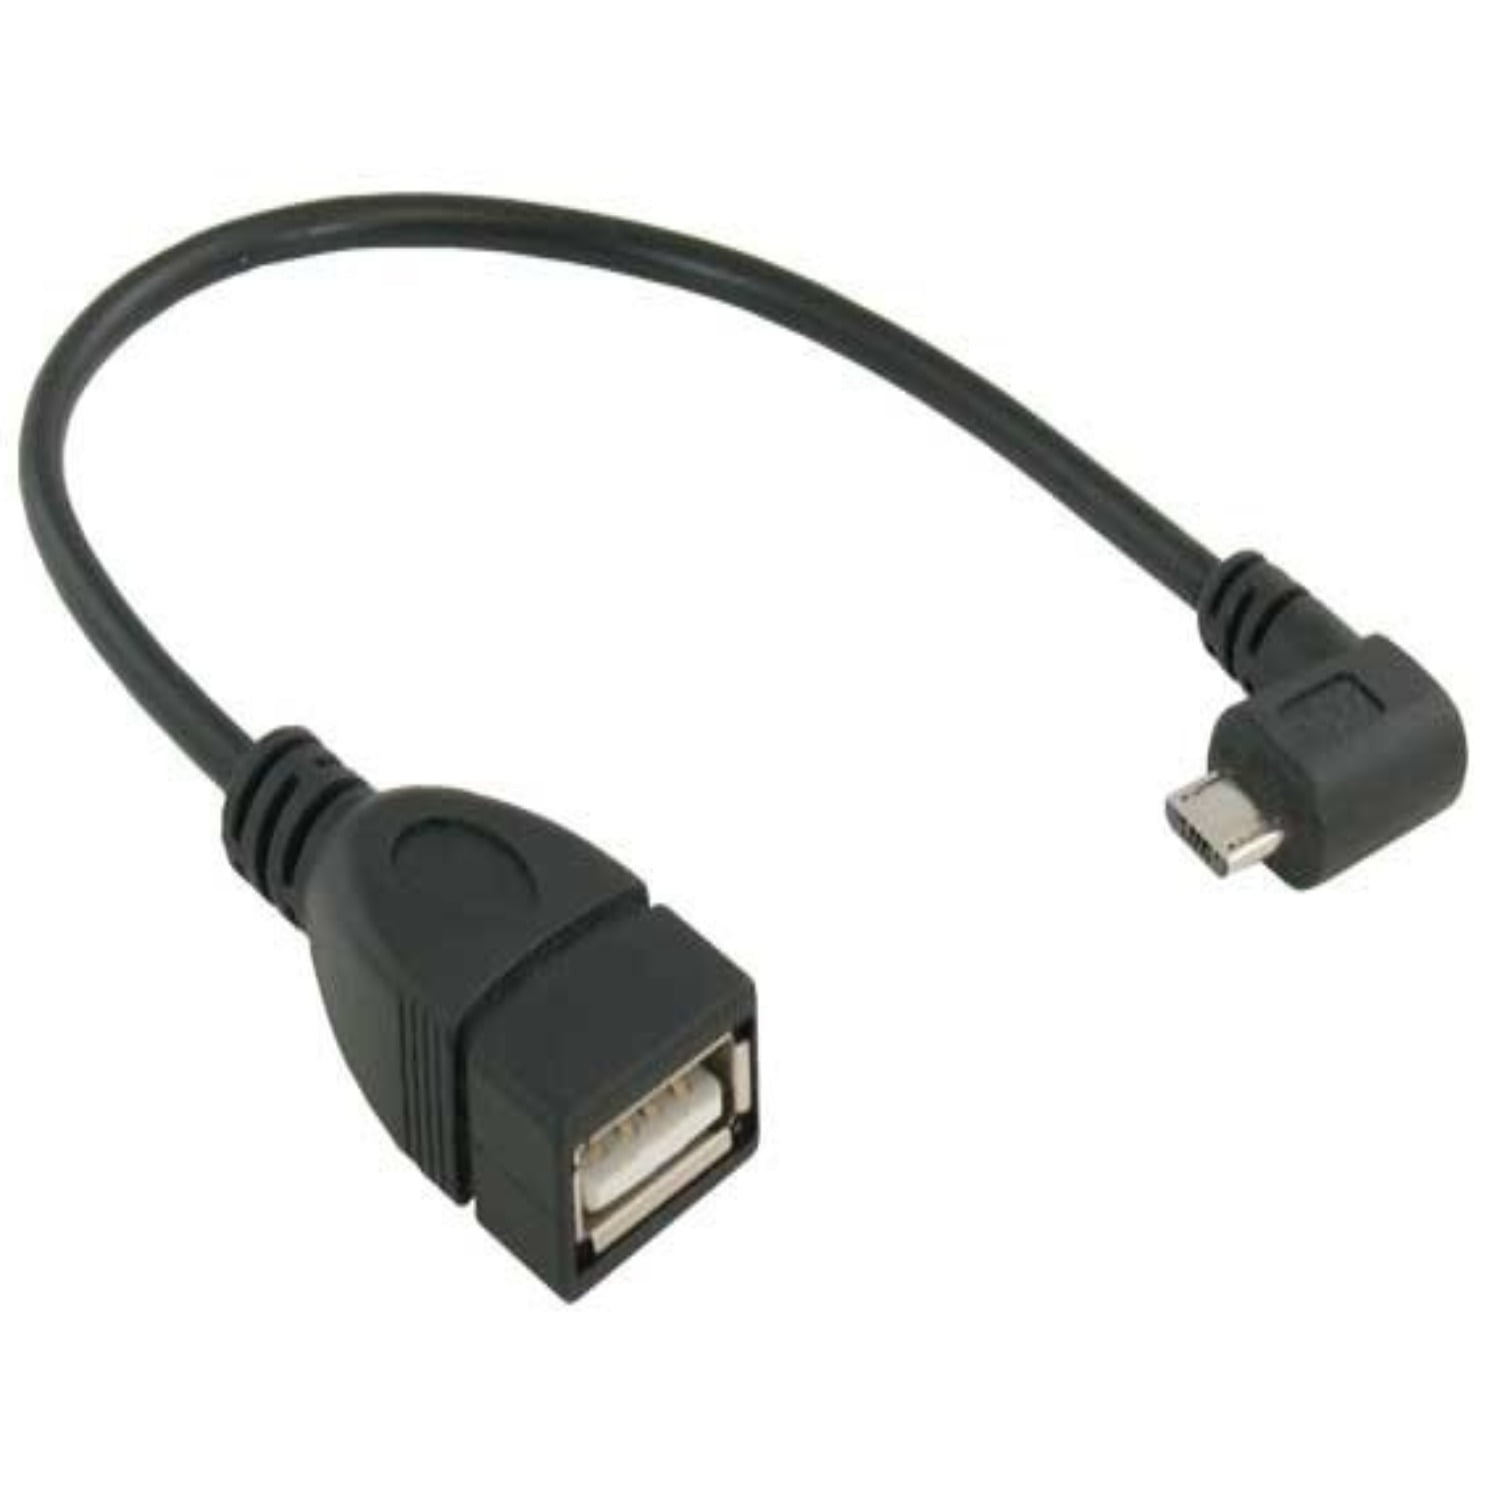 Right Angle Cable Connects You to Any Compatible USB Device with MicroUSB PRO OTG Cable Works for Alcatel OneTouch POP Star 4G